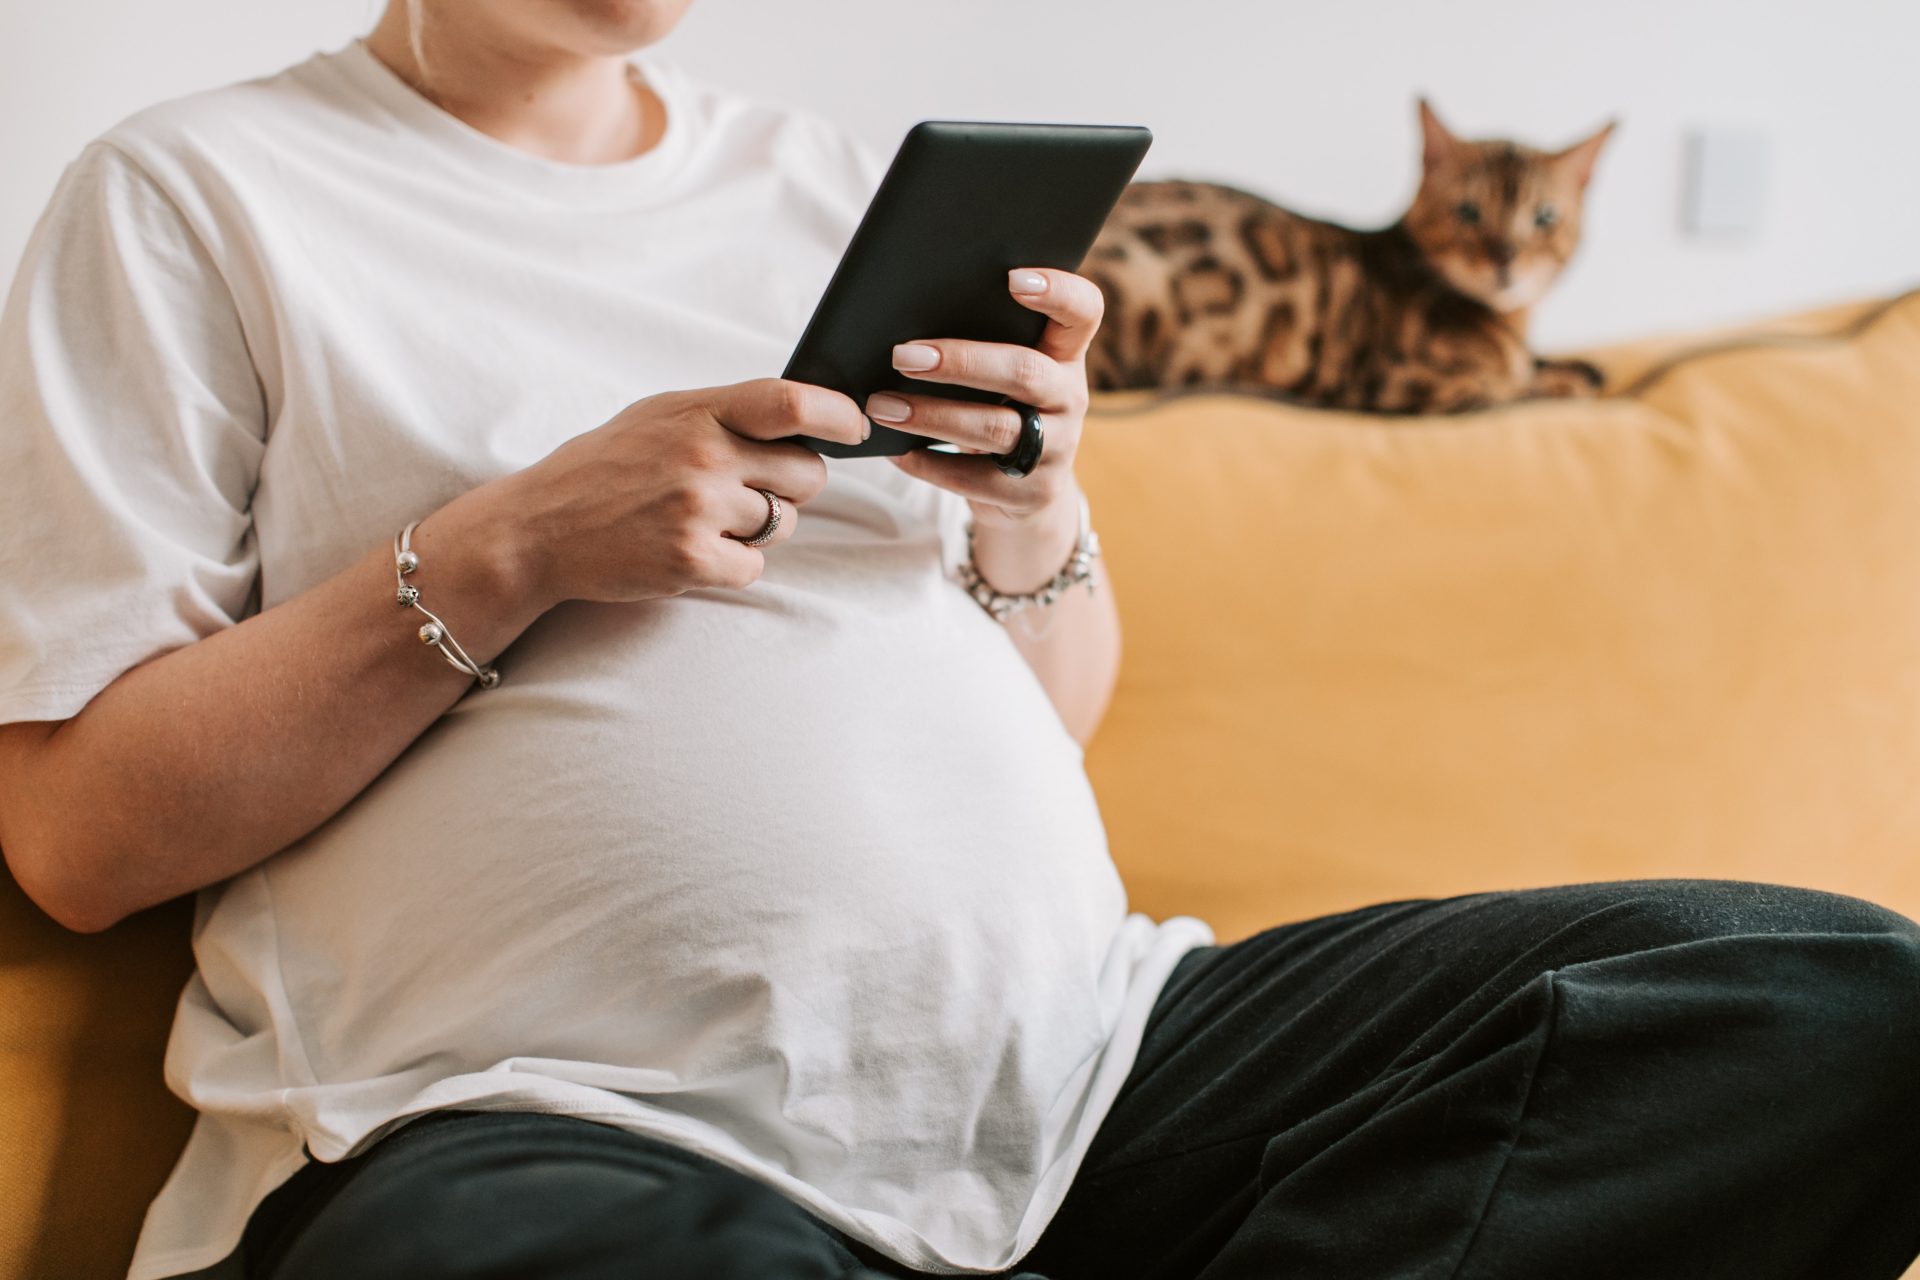 pregnant woman in white shirt holding a tablet